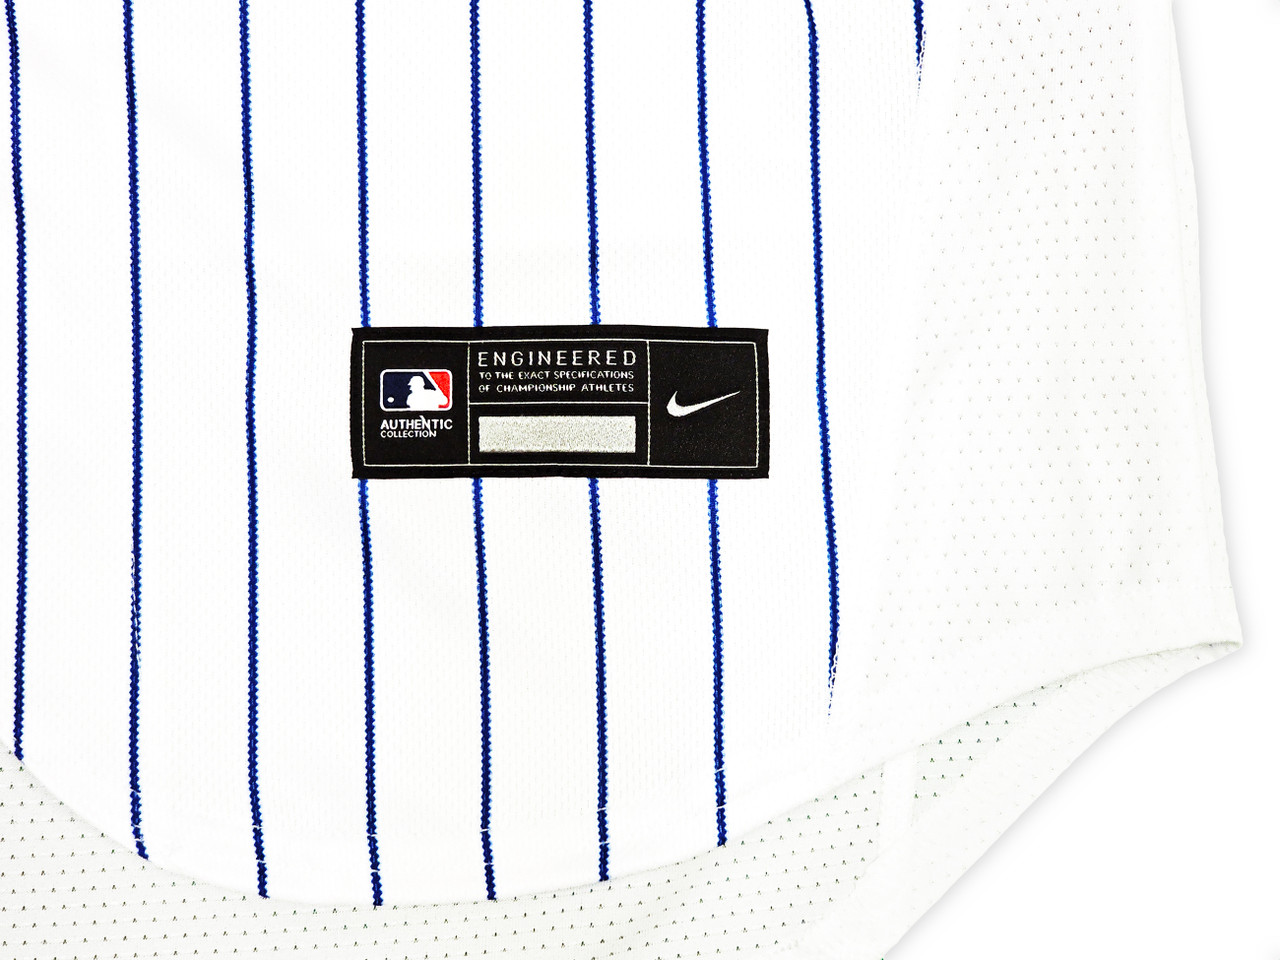 New York Mets Jacob deGrom Autographed White Nike Authentic Jersey Size 44  18-19 NL CY Fanatics Holo Stock #218734